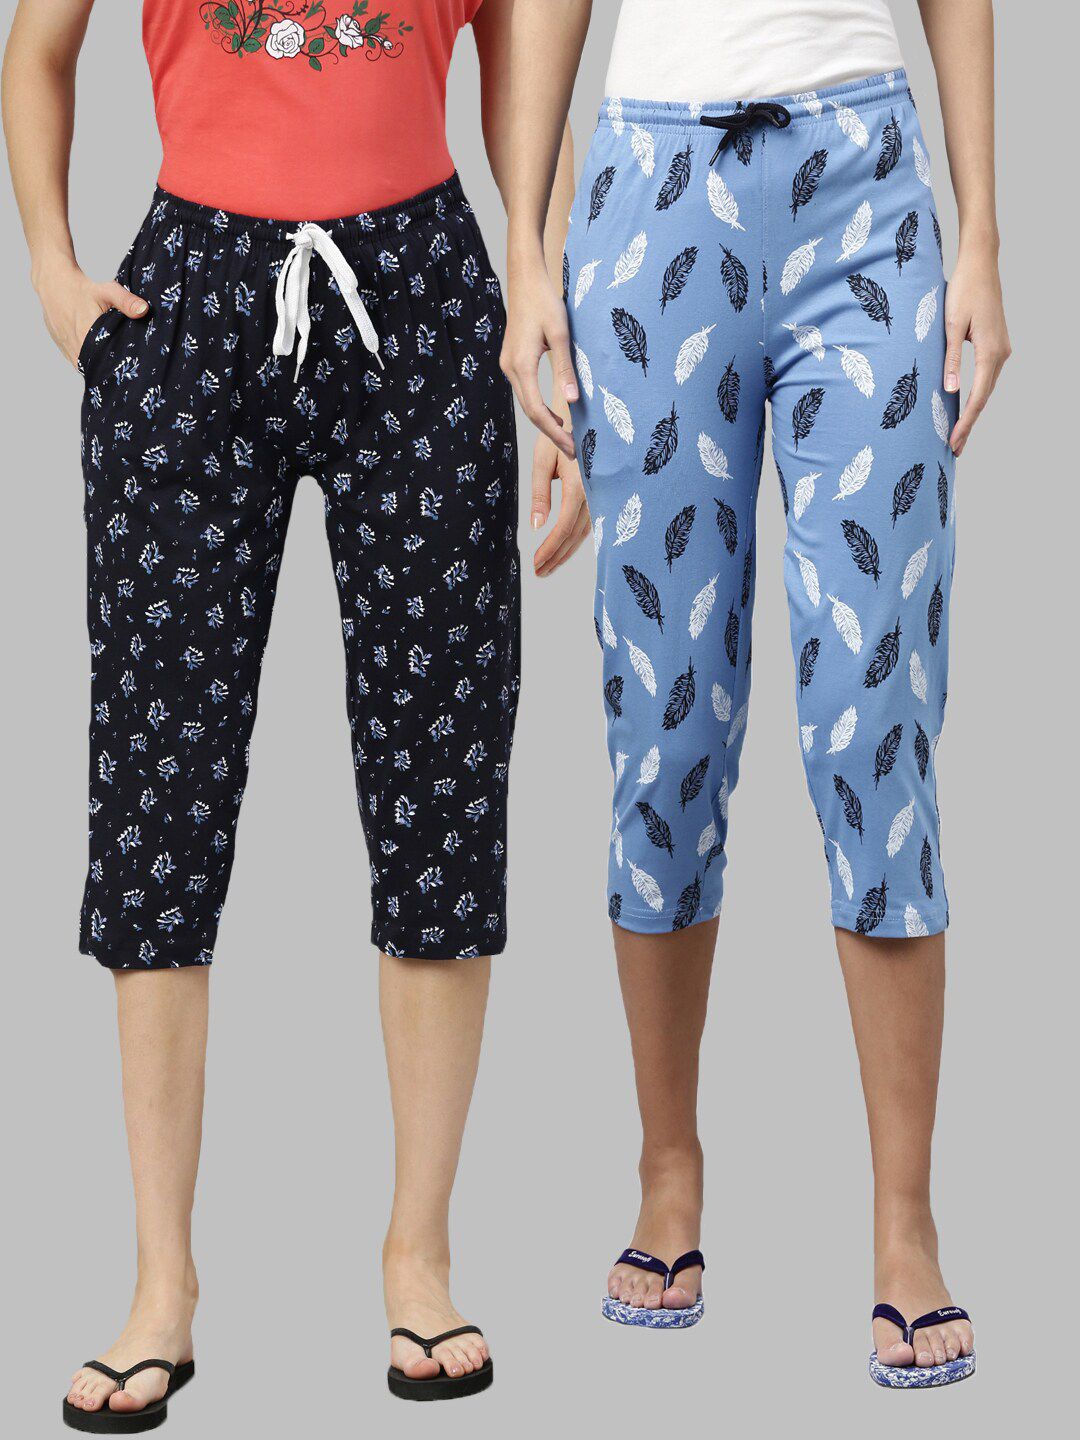 Kryptic Women Pack of 2 Navy Blue & White Printed Cotton Lounge Capris Price in India